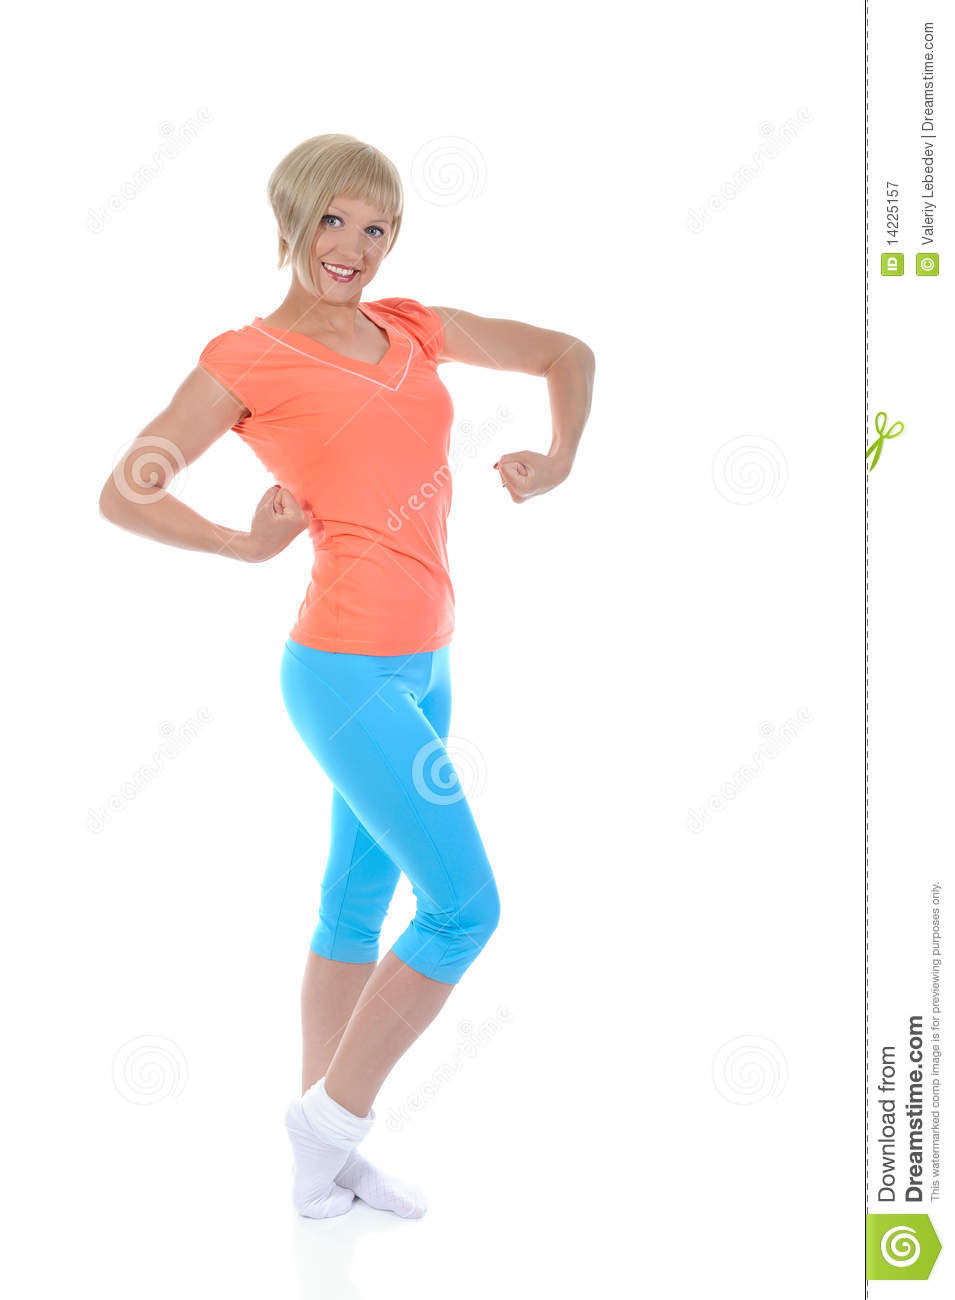 Free Stock Photography  Beautiful Girl Athlete Demonstrates Muscles